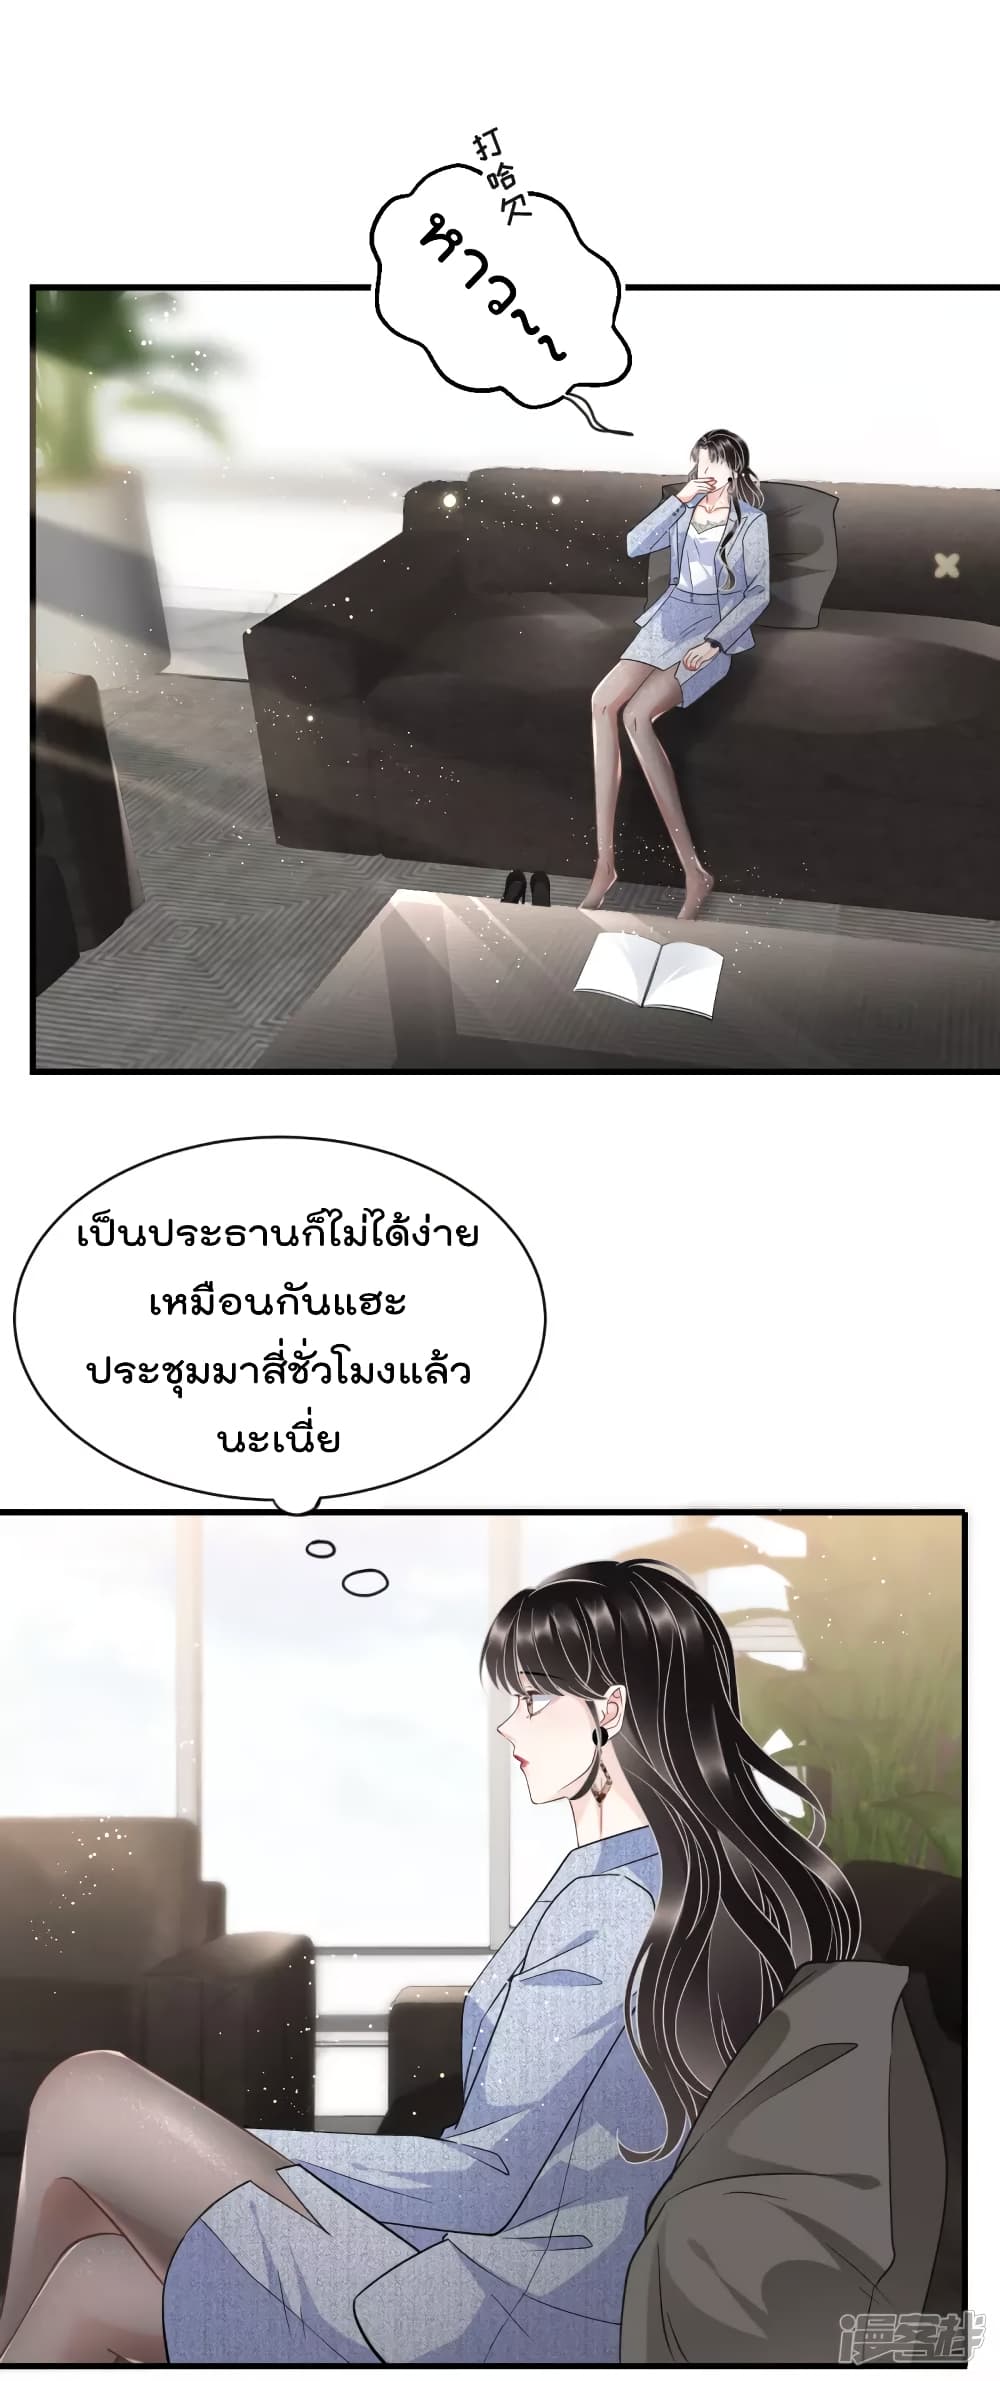 What Can the Eldest Lady Have คุณหนูใหญ่ ทำไมคุณร้ายอย่างนี้ 31-31